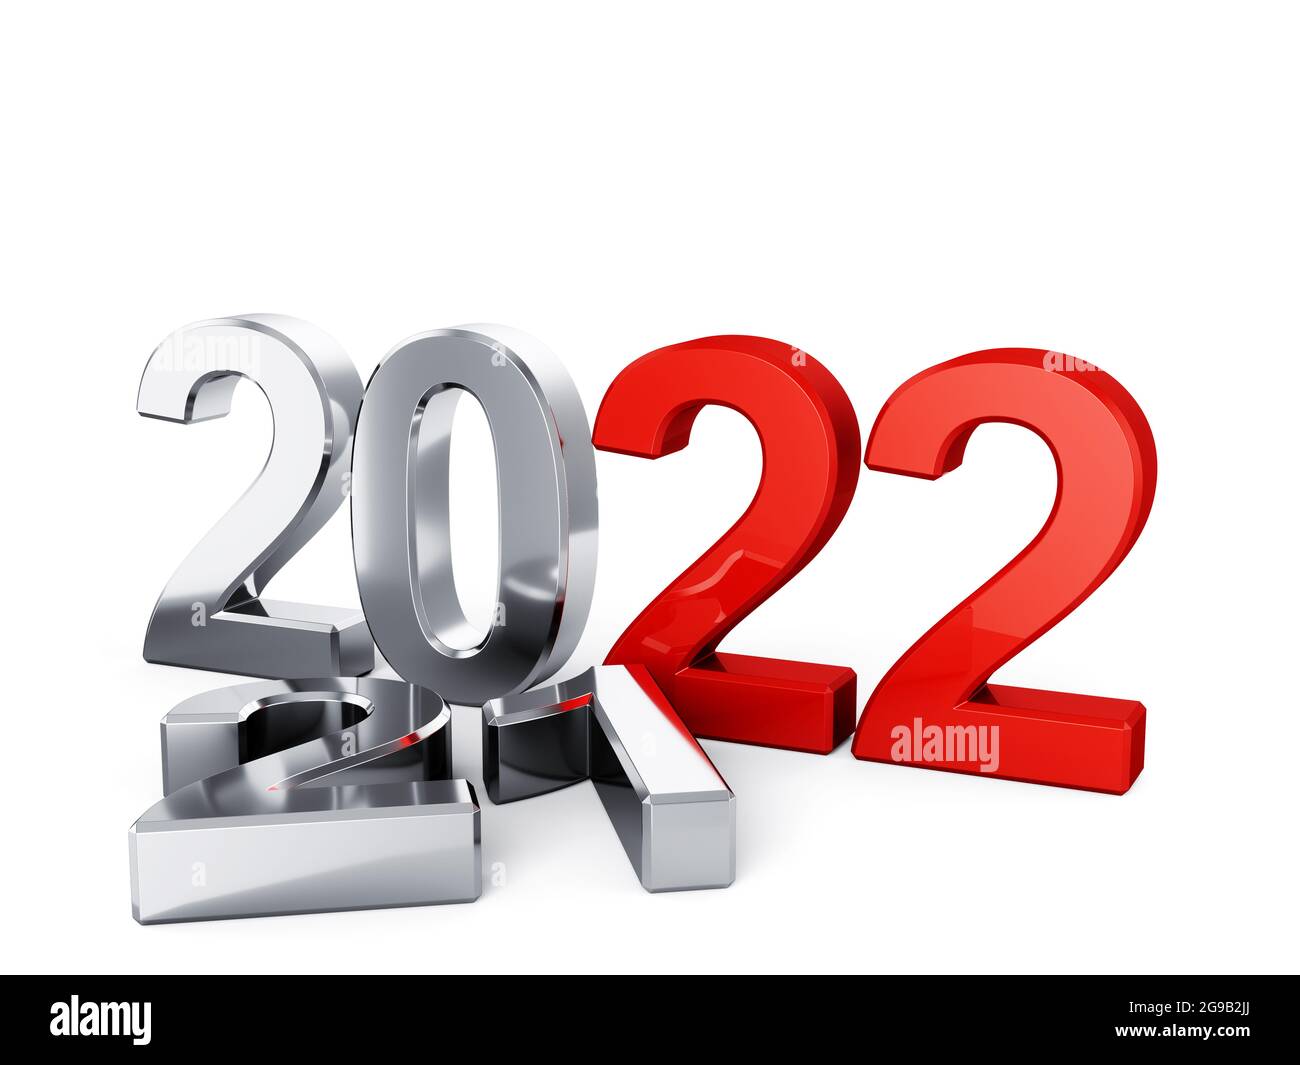 3d illustration of 2022 New Year concept isolated on white background Stock Photo